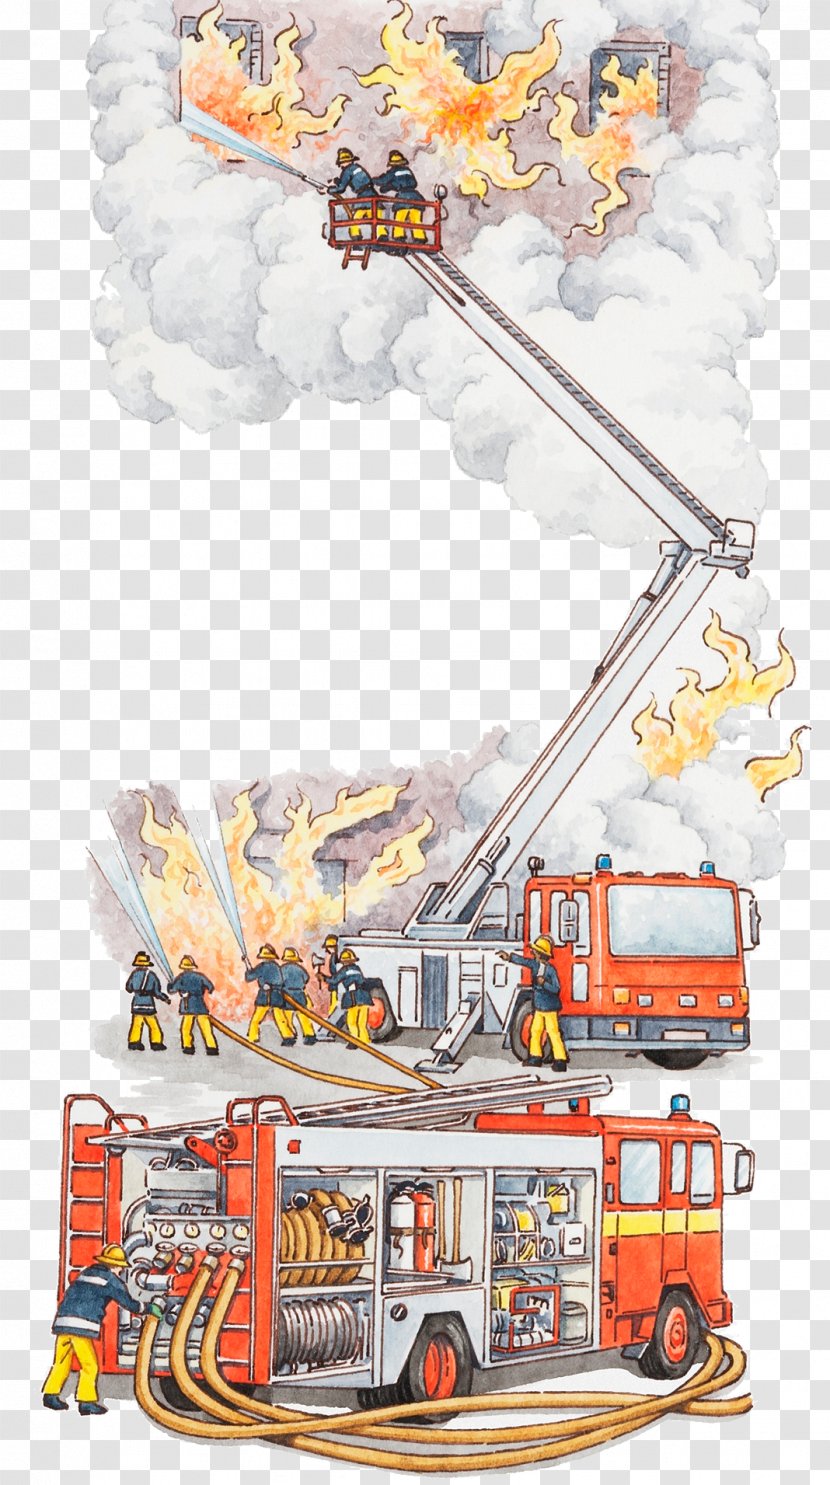 Firefighting Firefighter Illustration - Rescue - Fire Fighting Transparent PNG